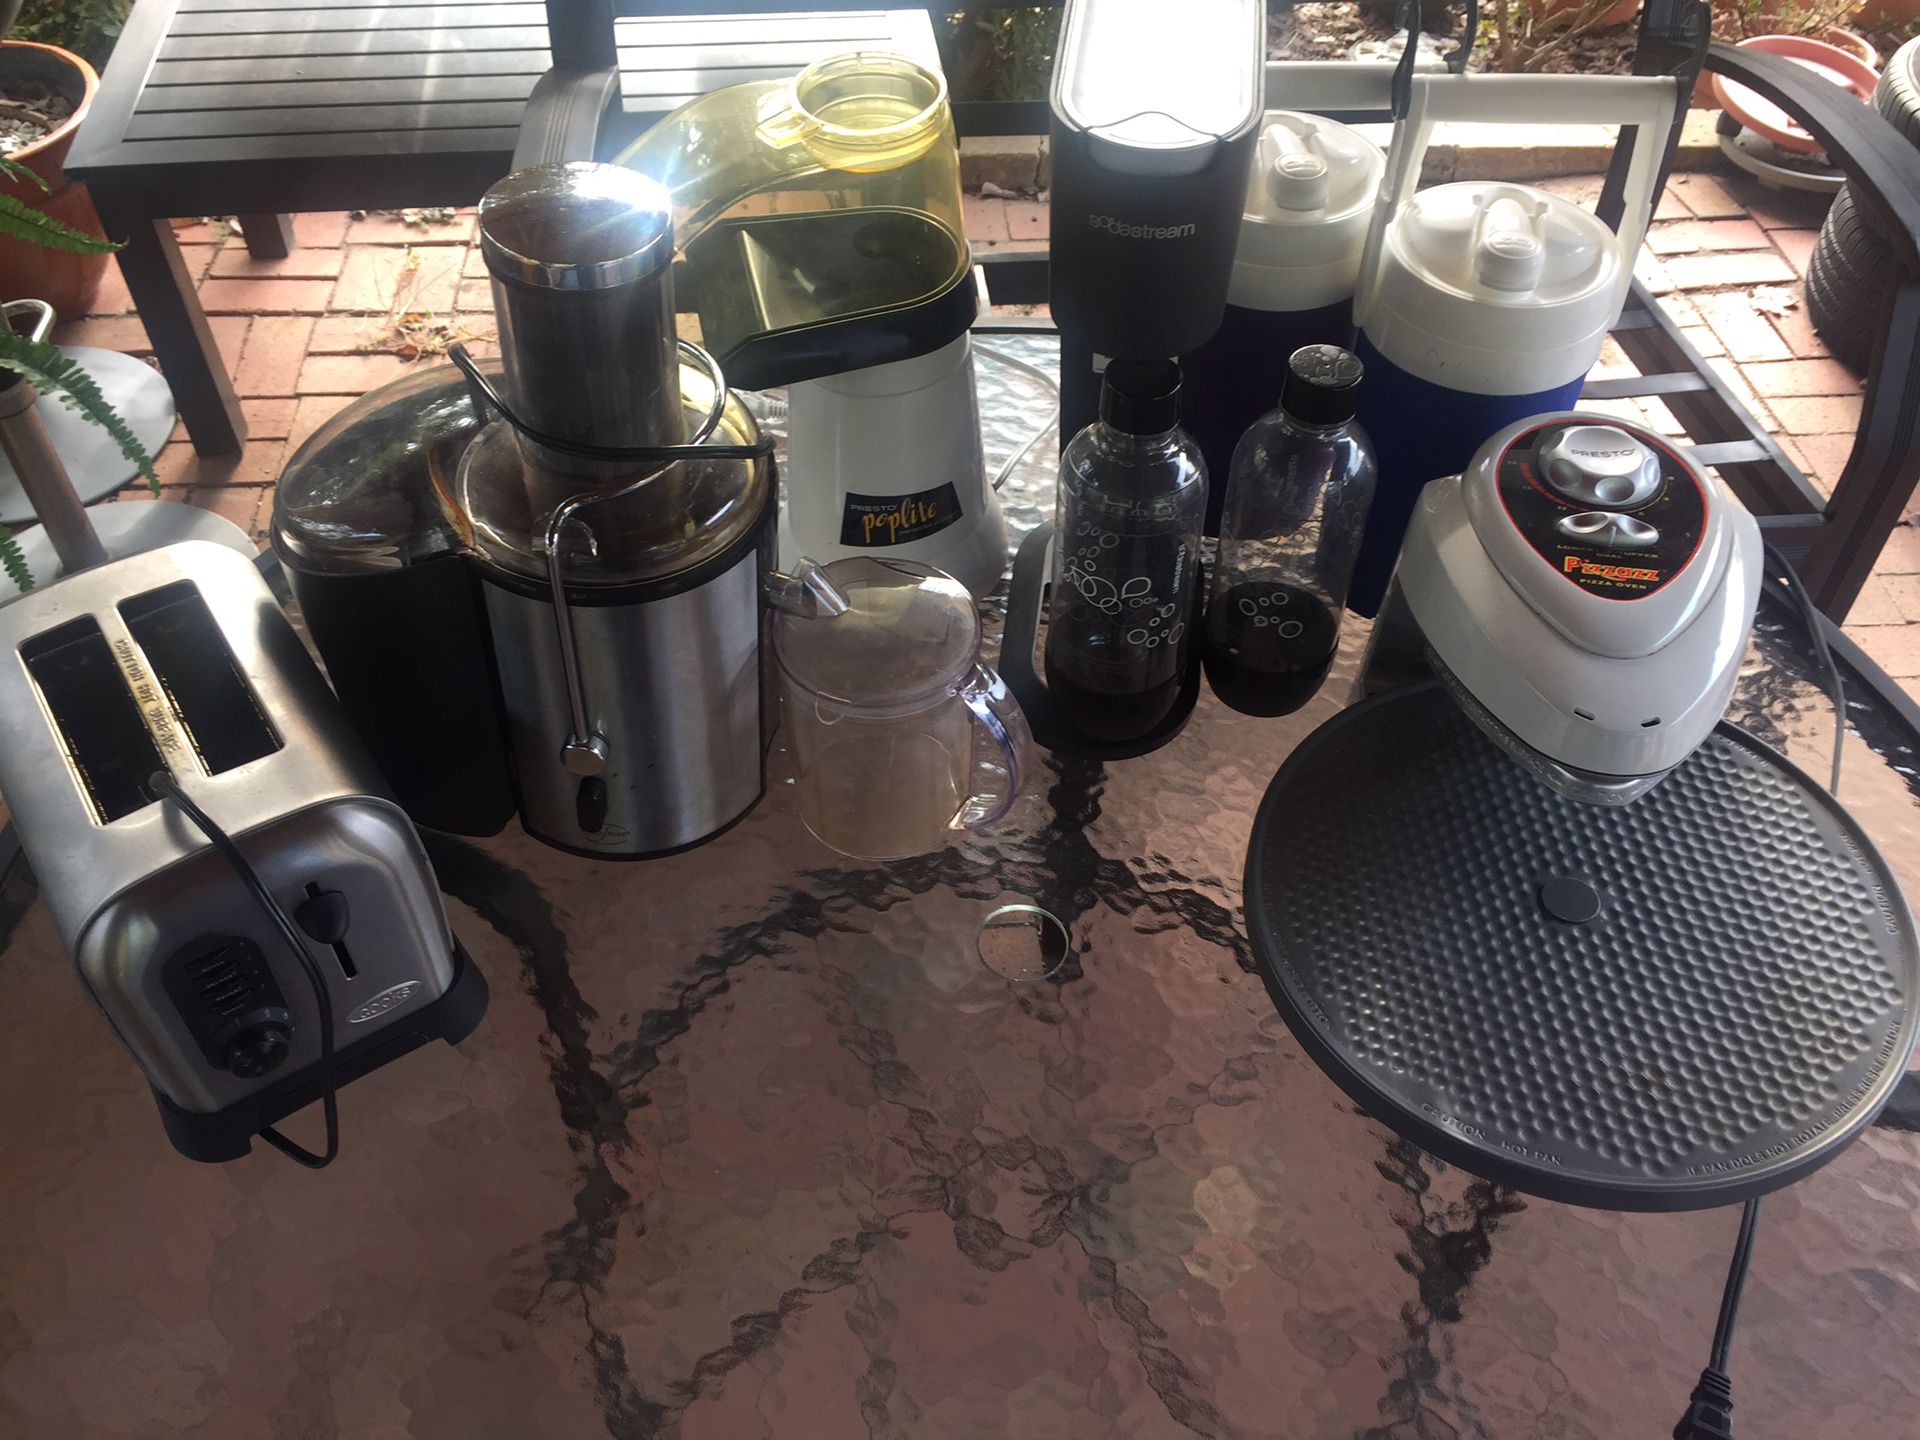 All Kitchen Items for $40